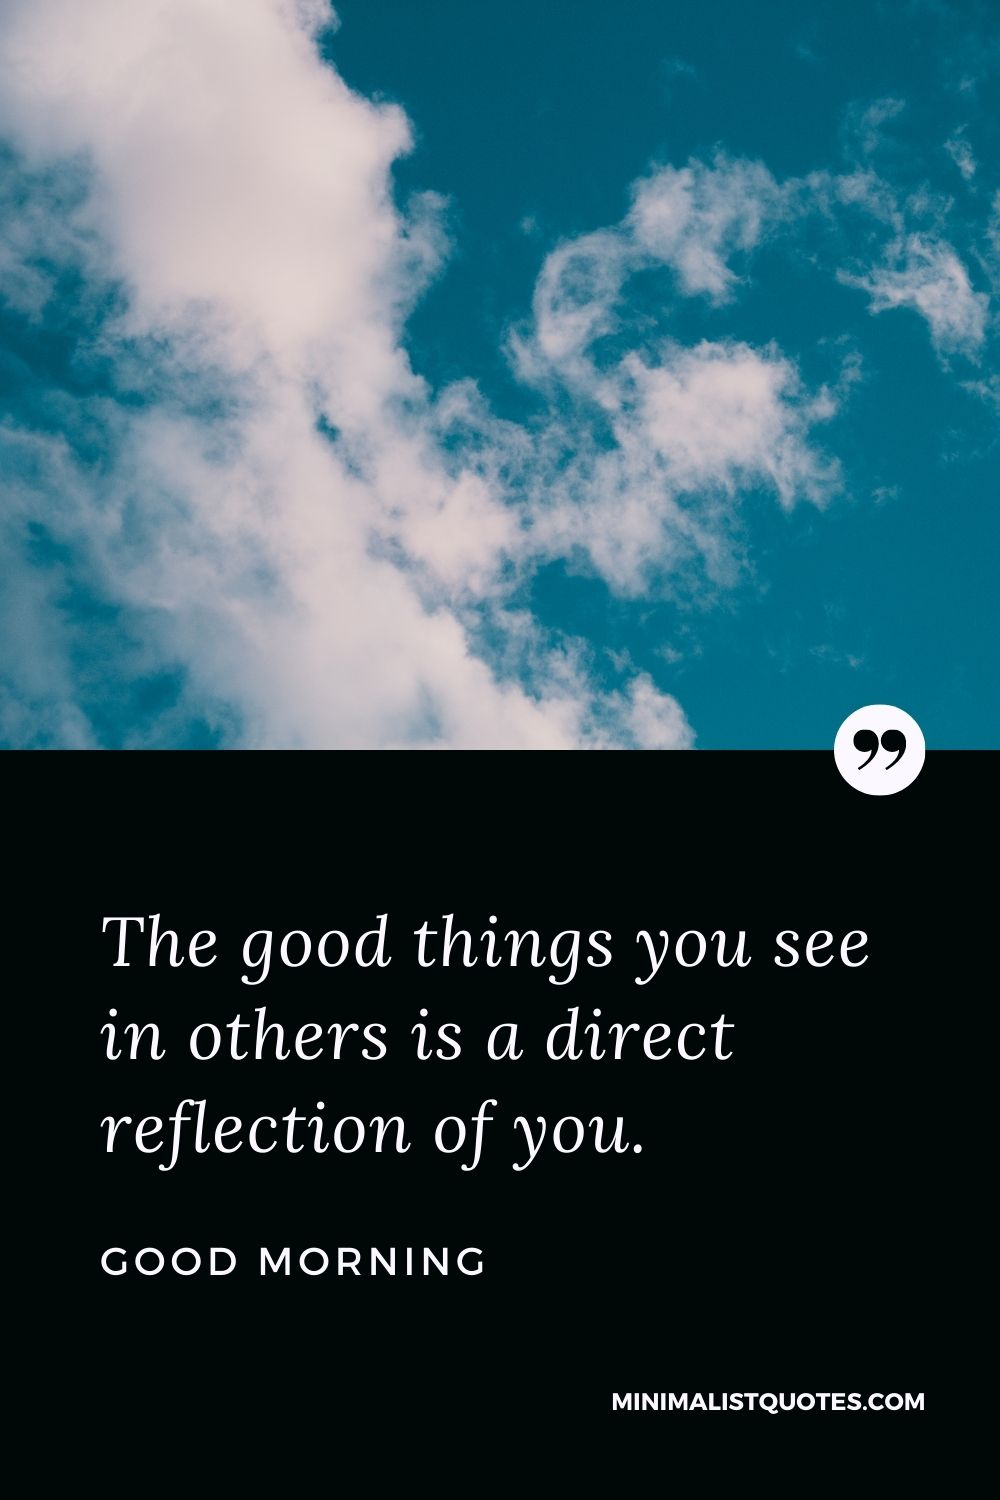 Good Morning Wish & Message With Image: The good things you see in others is a direct reflection of you.